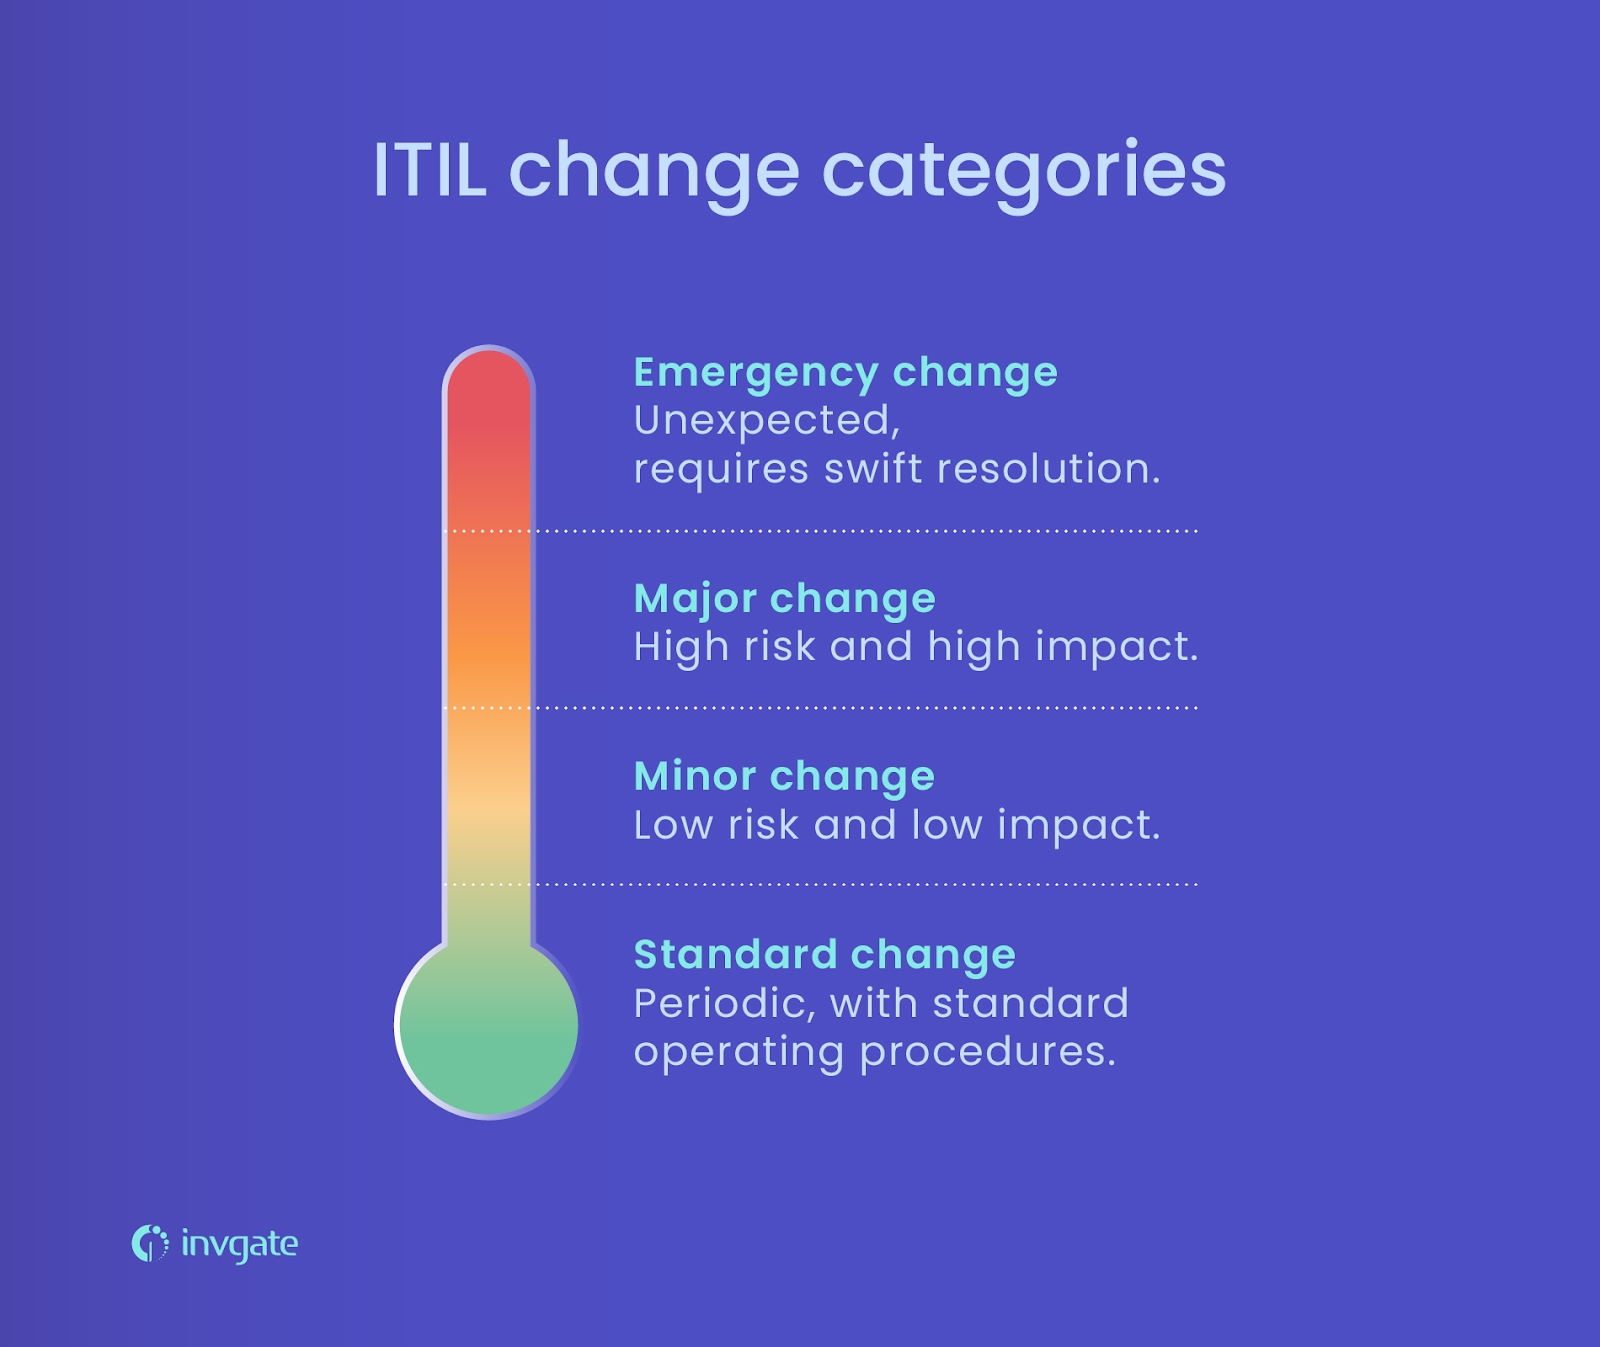 Change categories in ITIL 